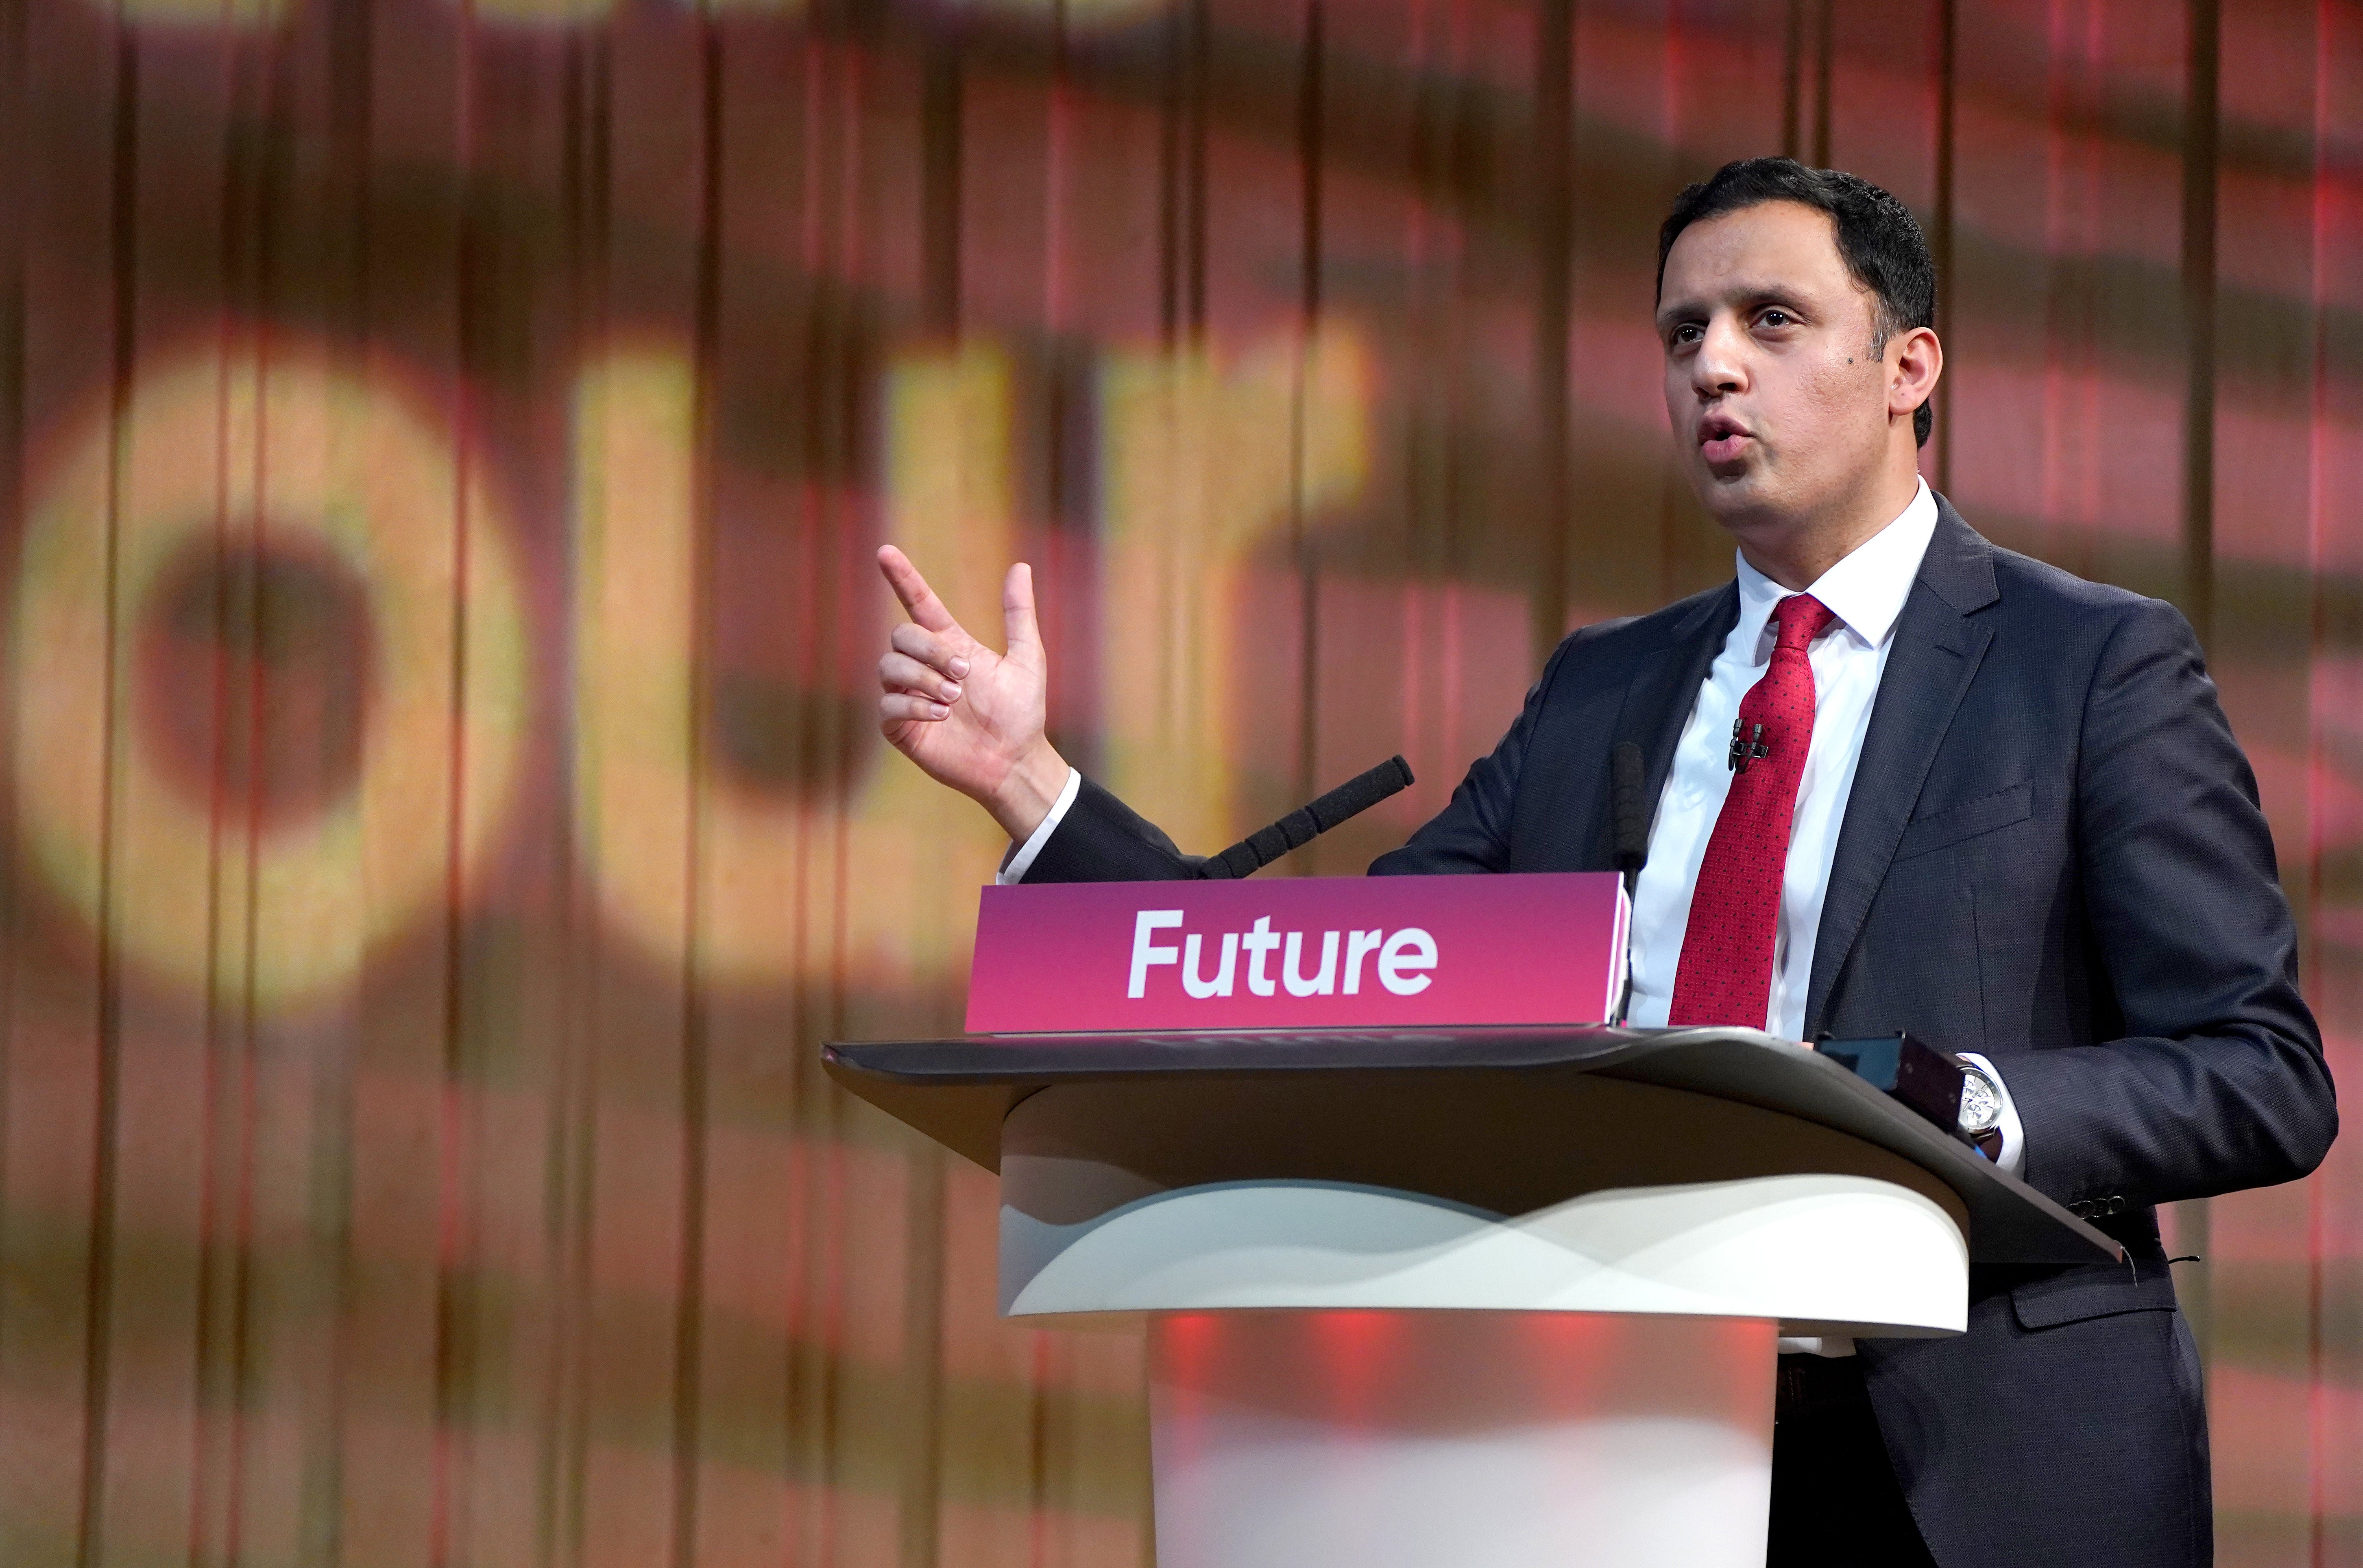 Labour leader Anas Sarwar was speaking during the final day of his party’s conference in Glasgow (Andrew Milligan/PA)